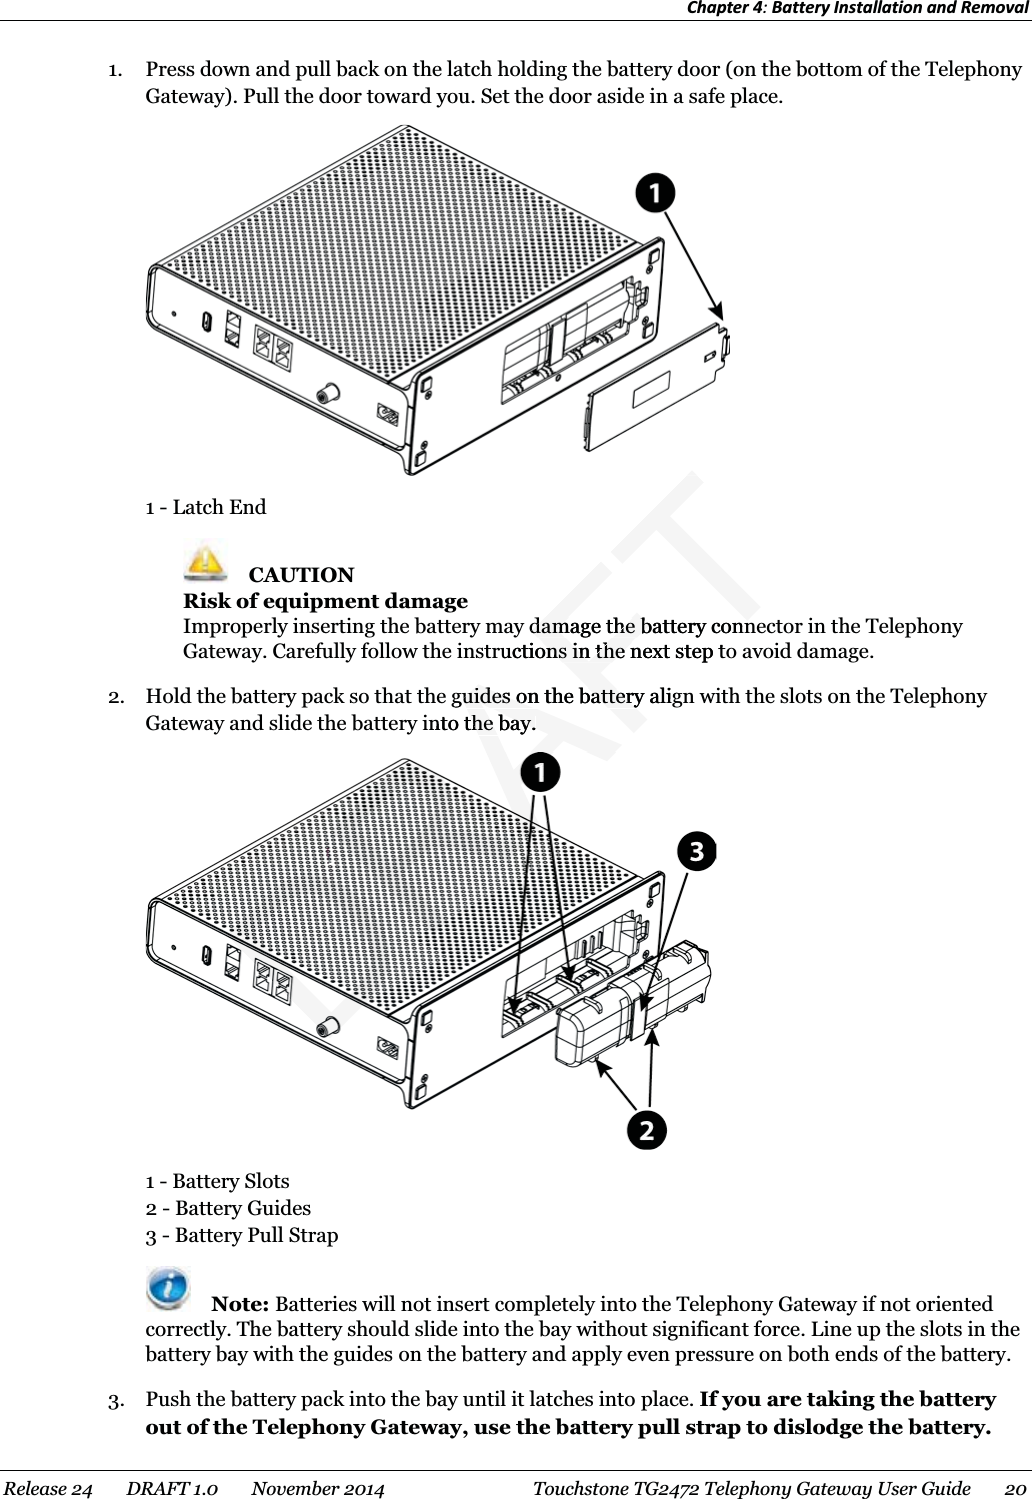 Chapter 4: Battery Installation and Removal  1. Press down and pull back on the latch holding the battery door (on the bottom of the Telephony Gateway). Pull the door toward you. Set the door aside in a safe place.  1 - Latch End  CAUTION Risk of equipment damage Improperly inserting the battery may damage the battery connector in the Telephony Gateway. Carefully follow the instructions in the next step to avoid damage. 2. Hold the battery pack so that the guides on the battery align with the slots on the Telephony Gateway and slide the battery into the bay.  1 - Battery Slots 2 - Battery Guides 3 - Battery Pull Strap  Note: Batteries will not insert completely into the Telephony Gateway if not oriented correctly. The battery should slide into the bay without significant force. Line up the slots in the battery bay with the guides on the battery and apply even pressure on both ends of the battery. 3. Push the battery pack into the bay until it latches into place. If you are taking the battery out of the Telephony Gateway, use the battery pull strap to dislodge the battery. Release 24    DRAFT 1.0    November 2014  Touchstone TG2472 Telephony Gateway User Guide    20  RAFTdamage the battery conndamage the battery connructions in the next step tons in the nguides on the battery aliguides on the batteryinto the bay.the bay.